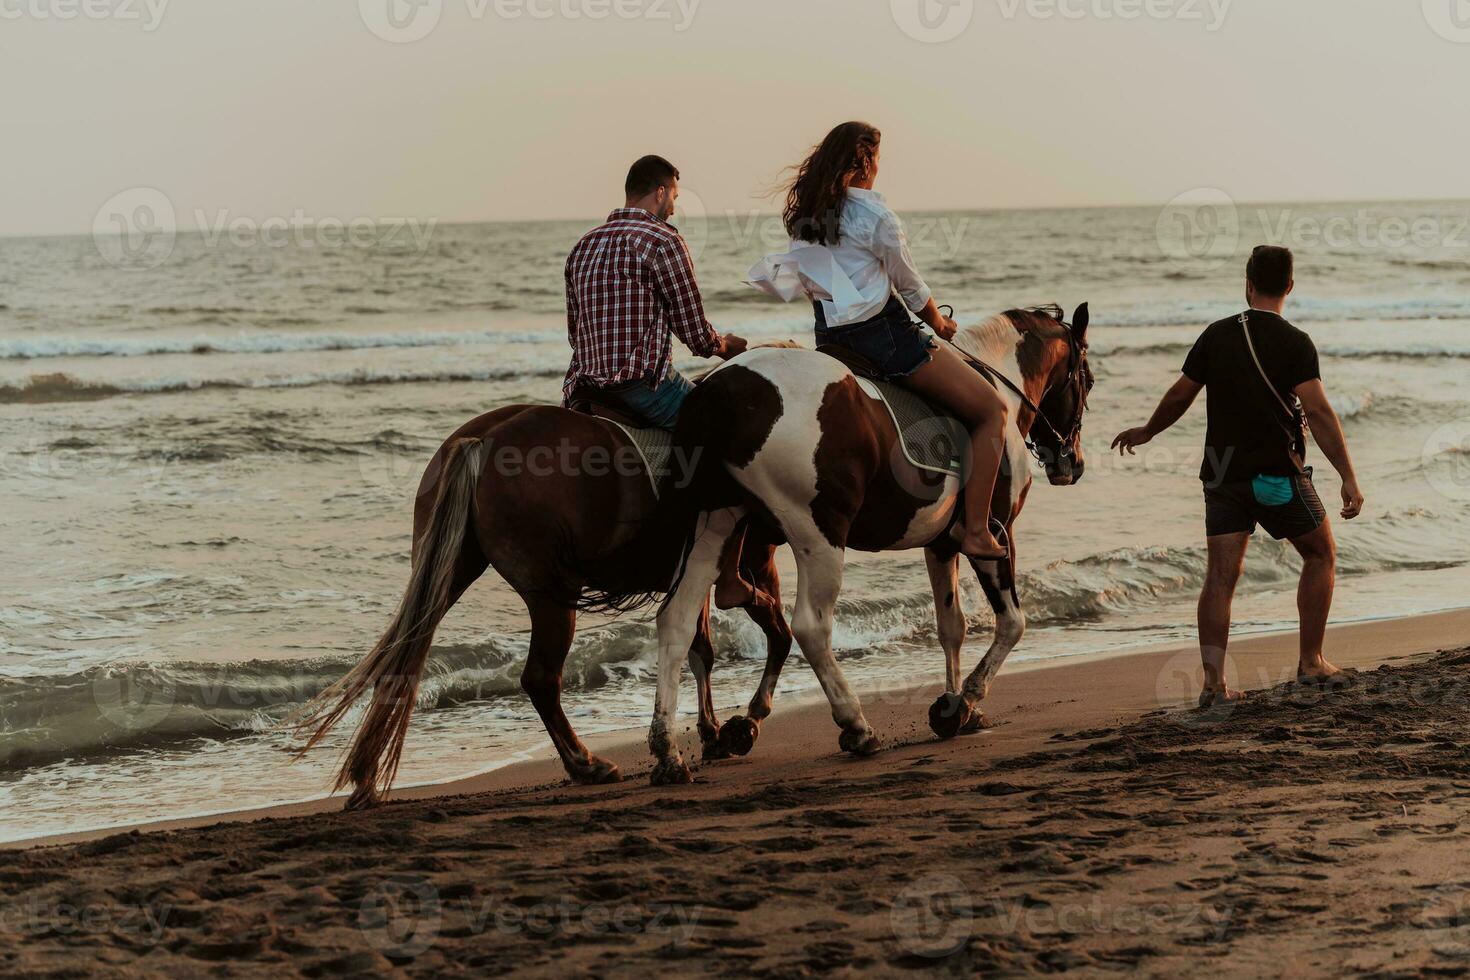 A loving couple in summer clothes riding a horse on a sandy beach at sunset. Sea and sunset in the background. Selective focus photo